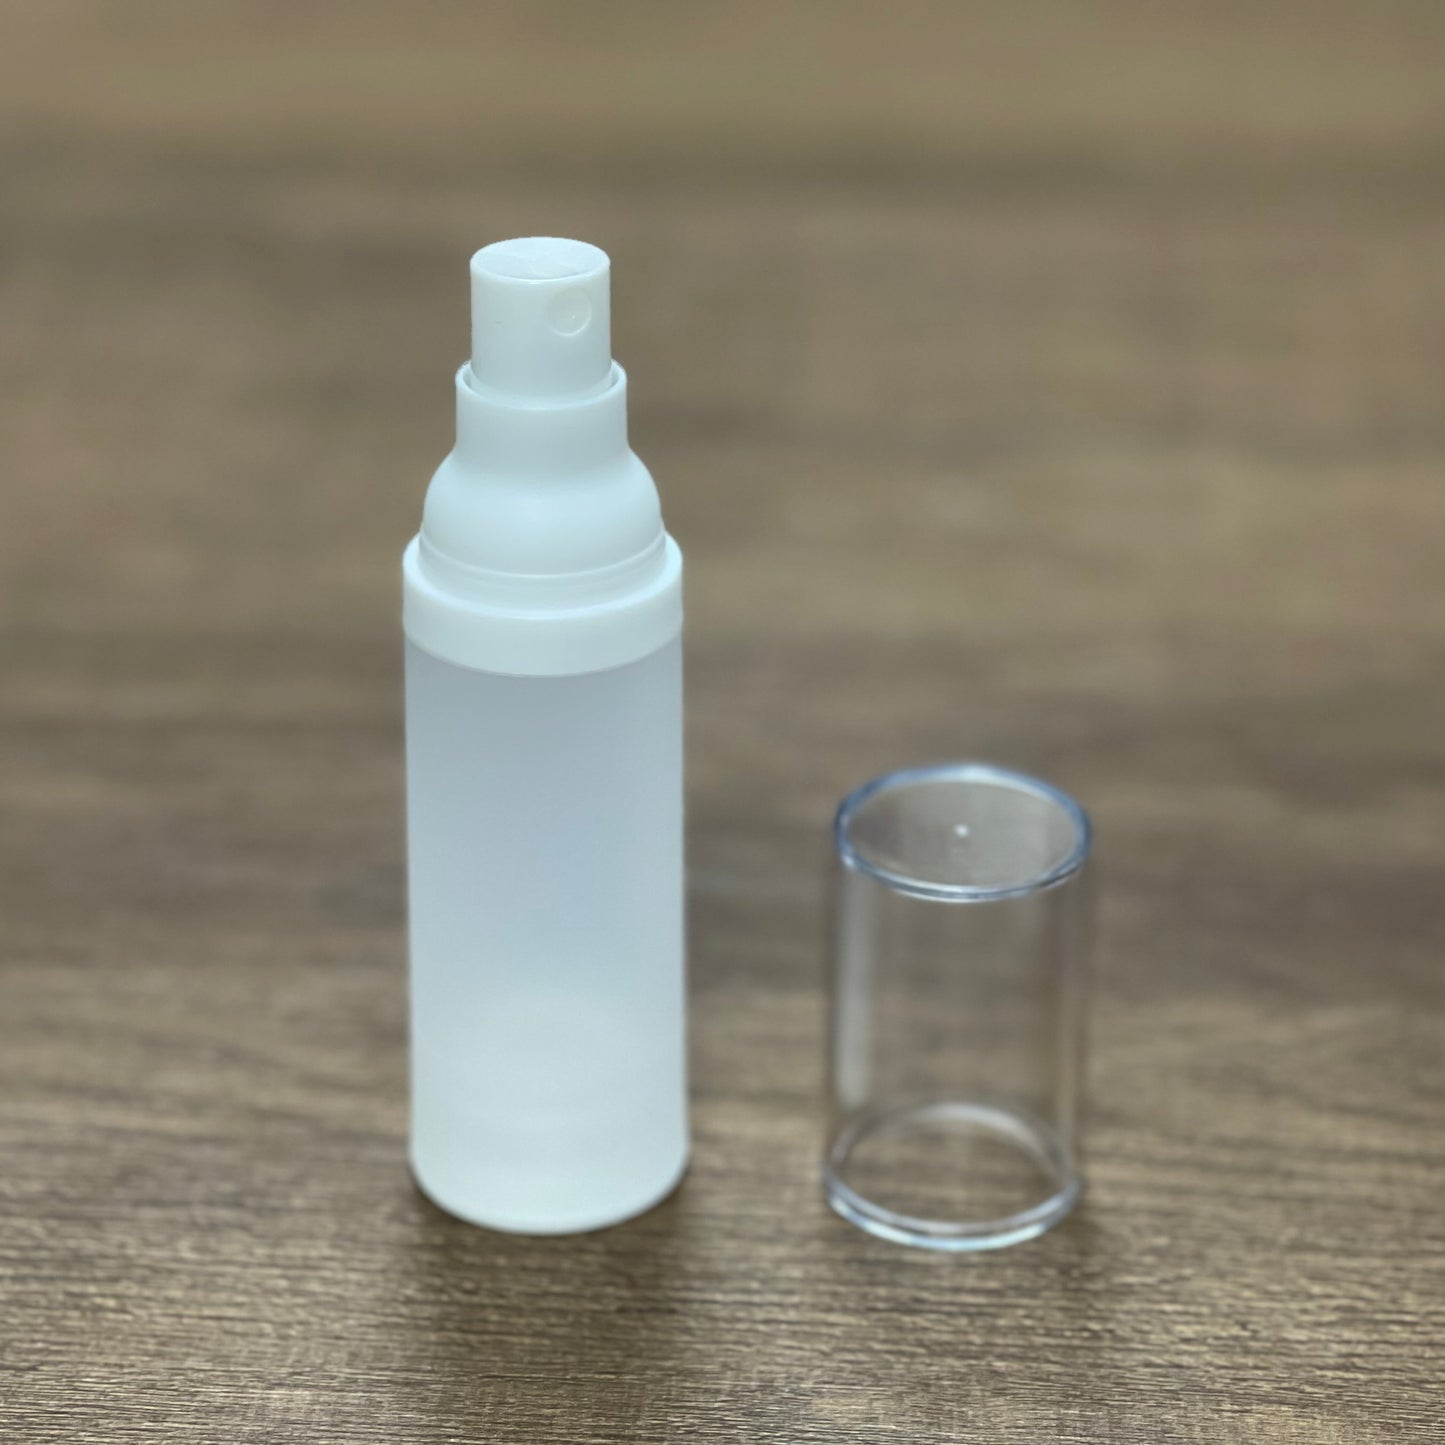 30 ml Airless Frosted Spray Bottle   30ml 磨沙真空乳液噴霧瓶